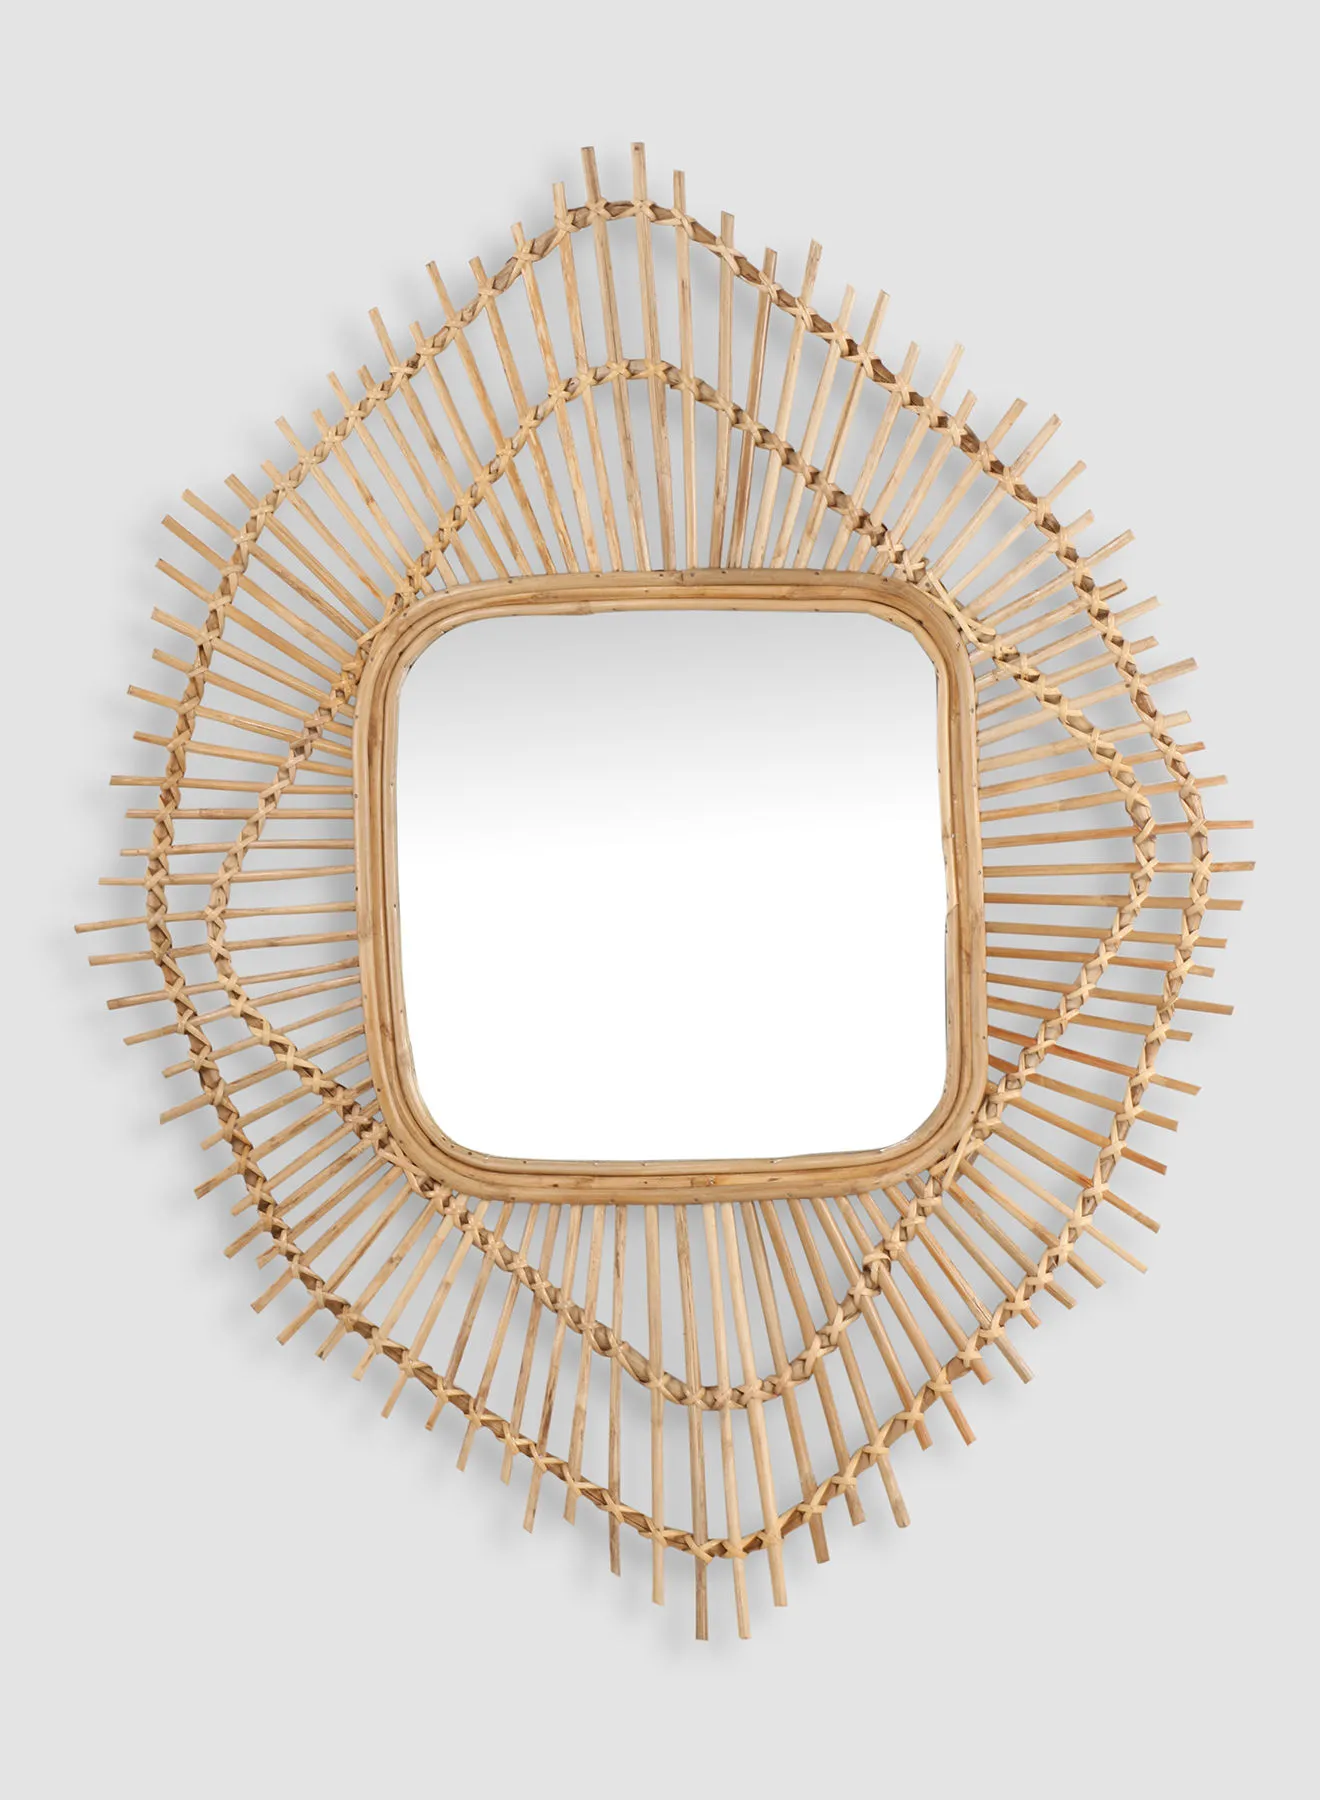 Switch Modern Design Wall Mirror Unique Luxury Quality Material For The Perfect Stylish Home SAS21B Natural L94 X H17centimeter